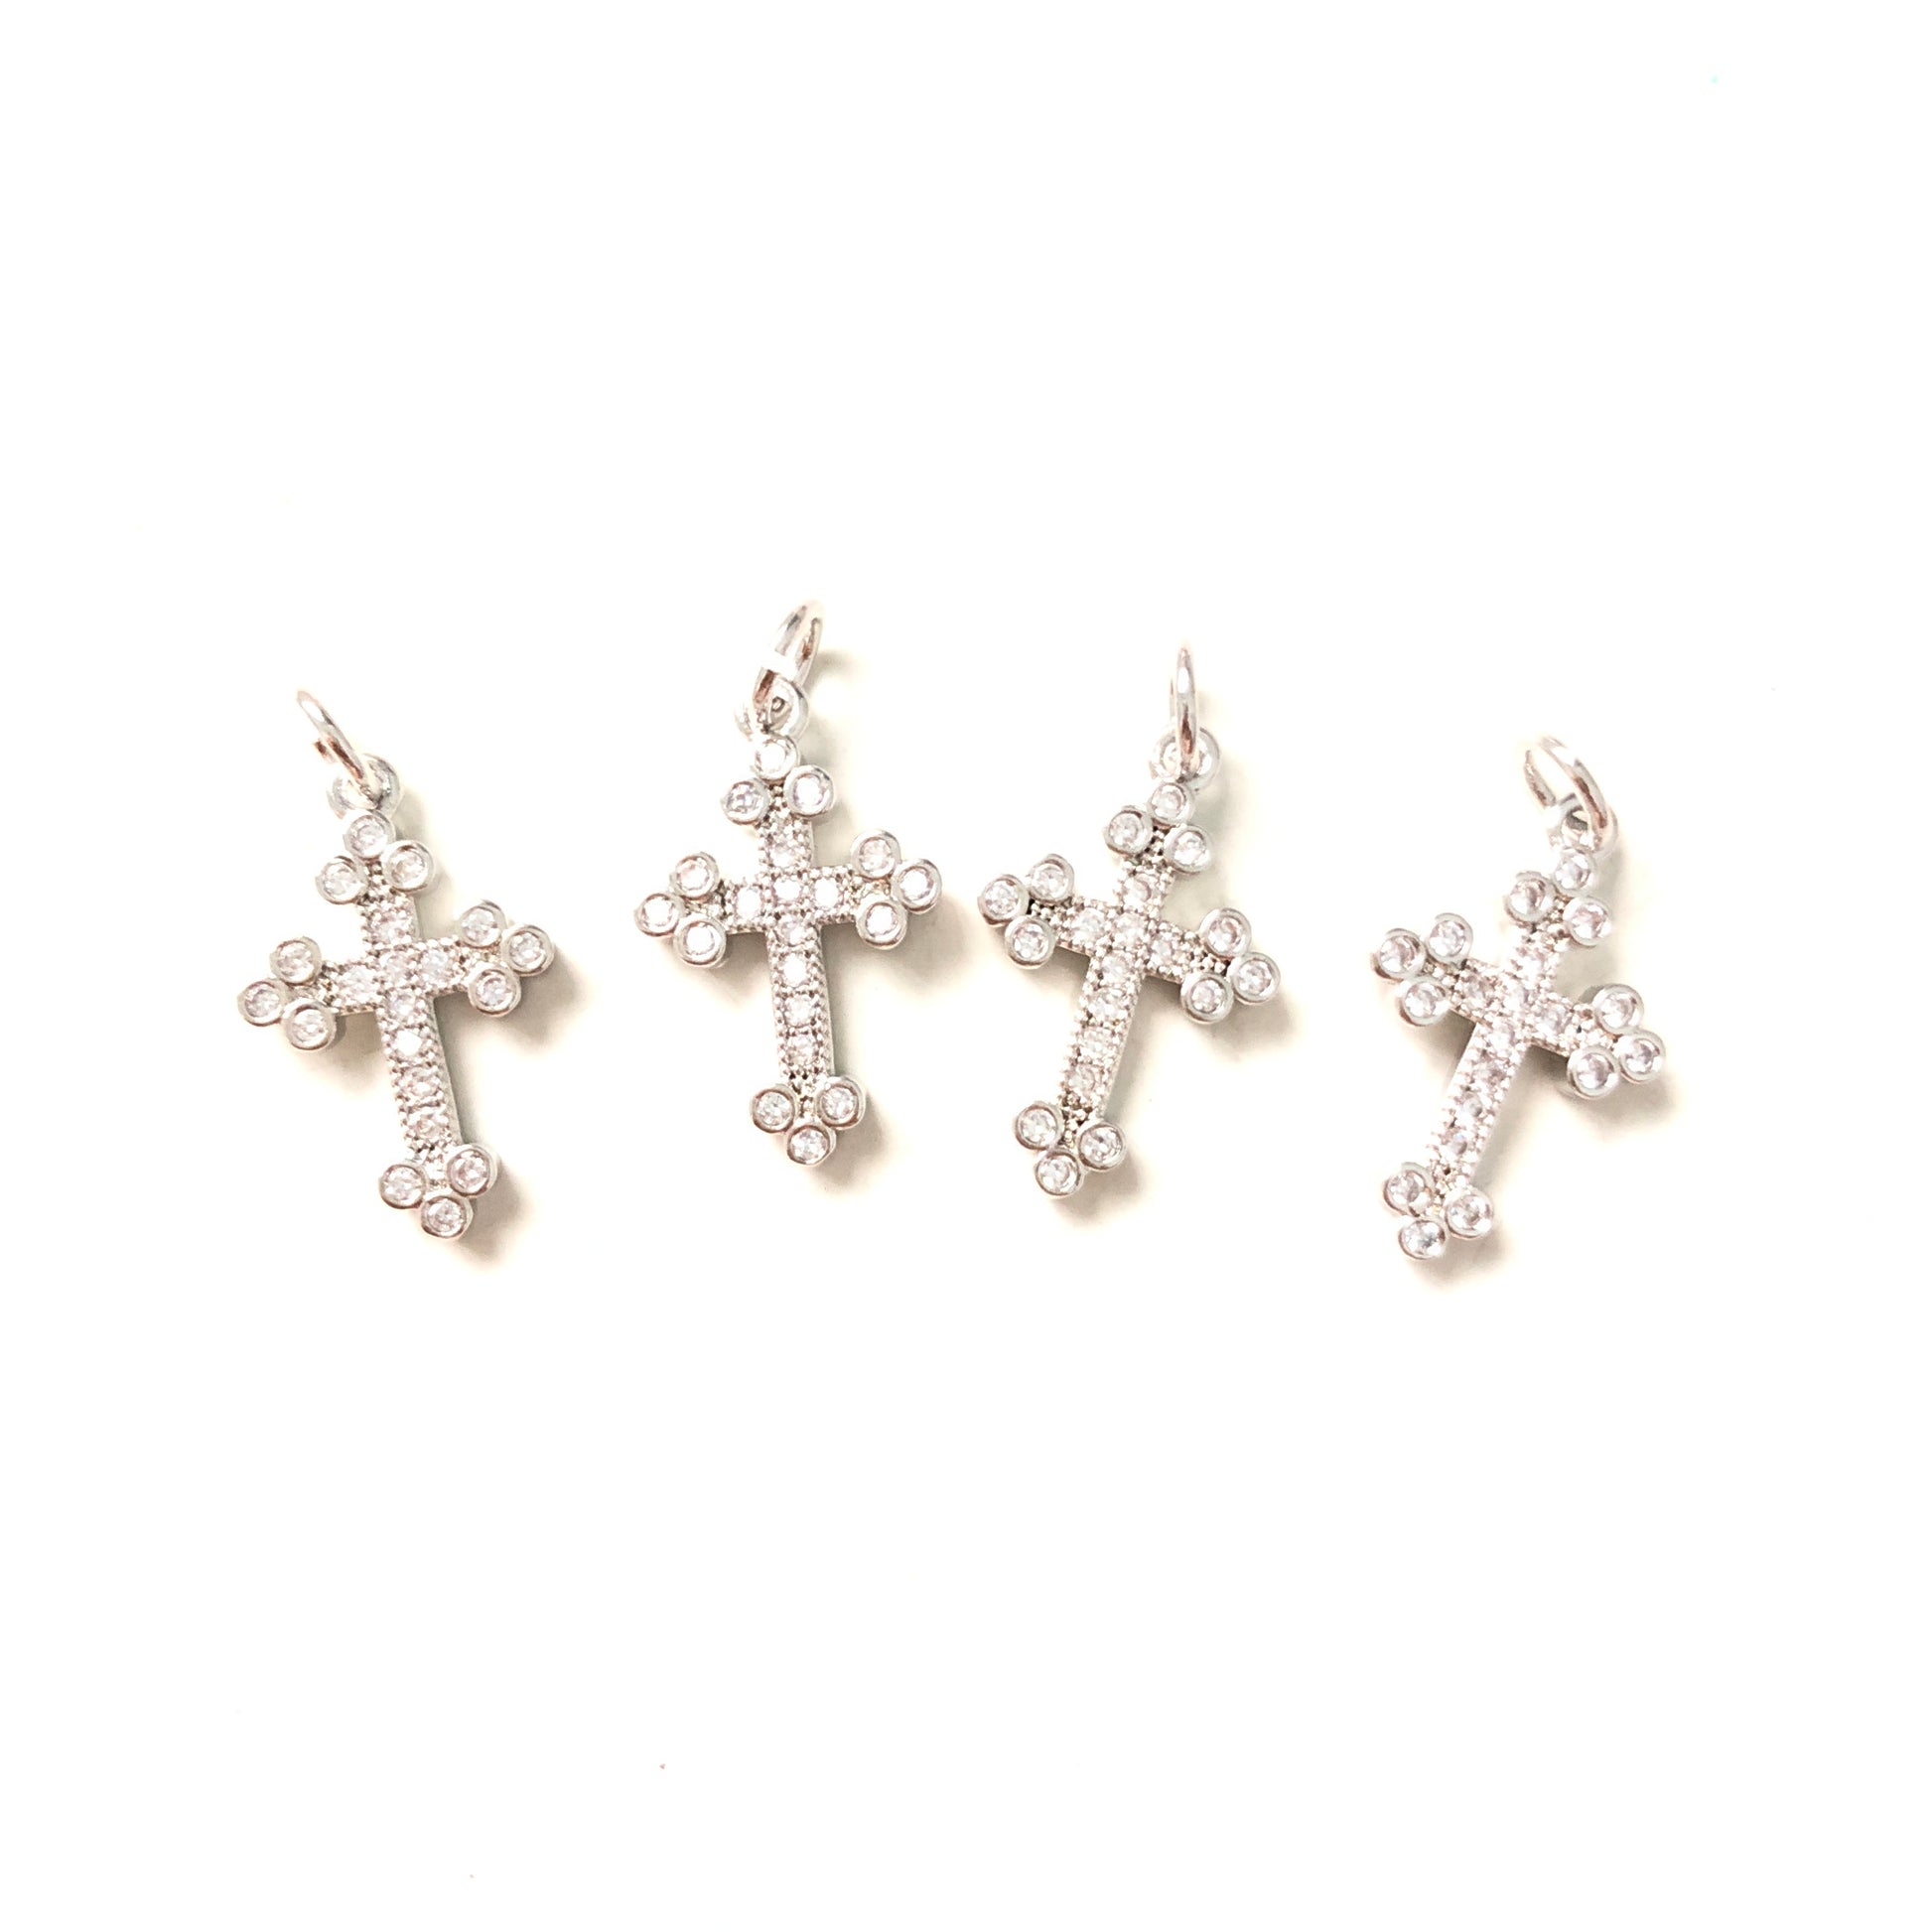 10pcs/lot 18.5*11.5mm CZ Paved Cross Charms Silver CZ Paved Charms Crosses Small Sizes Charms Beads Beyond